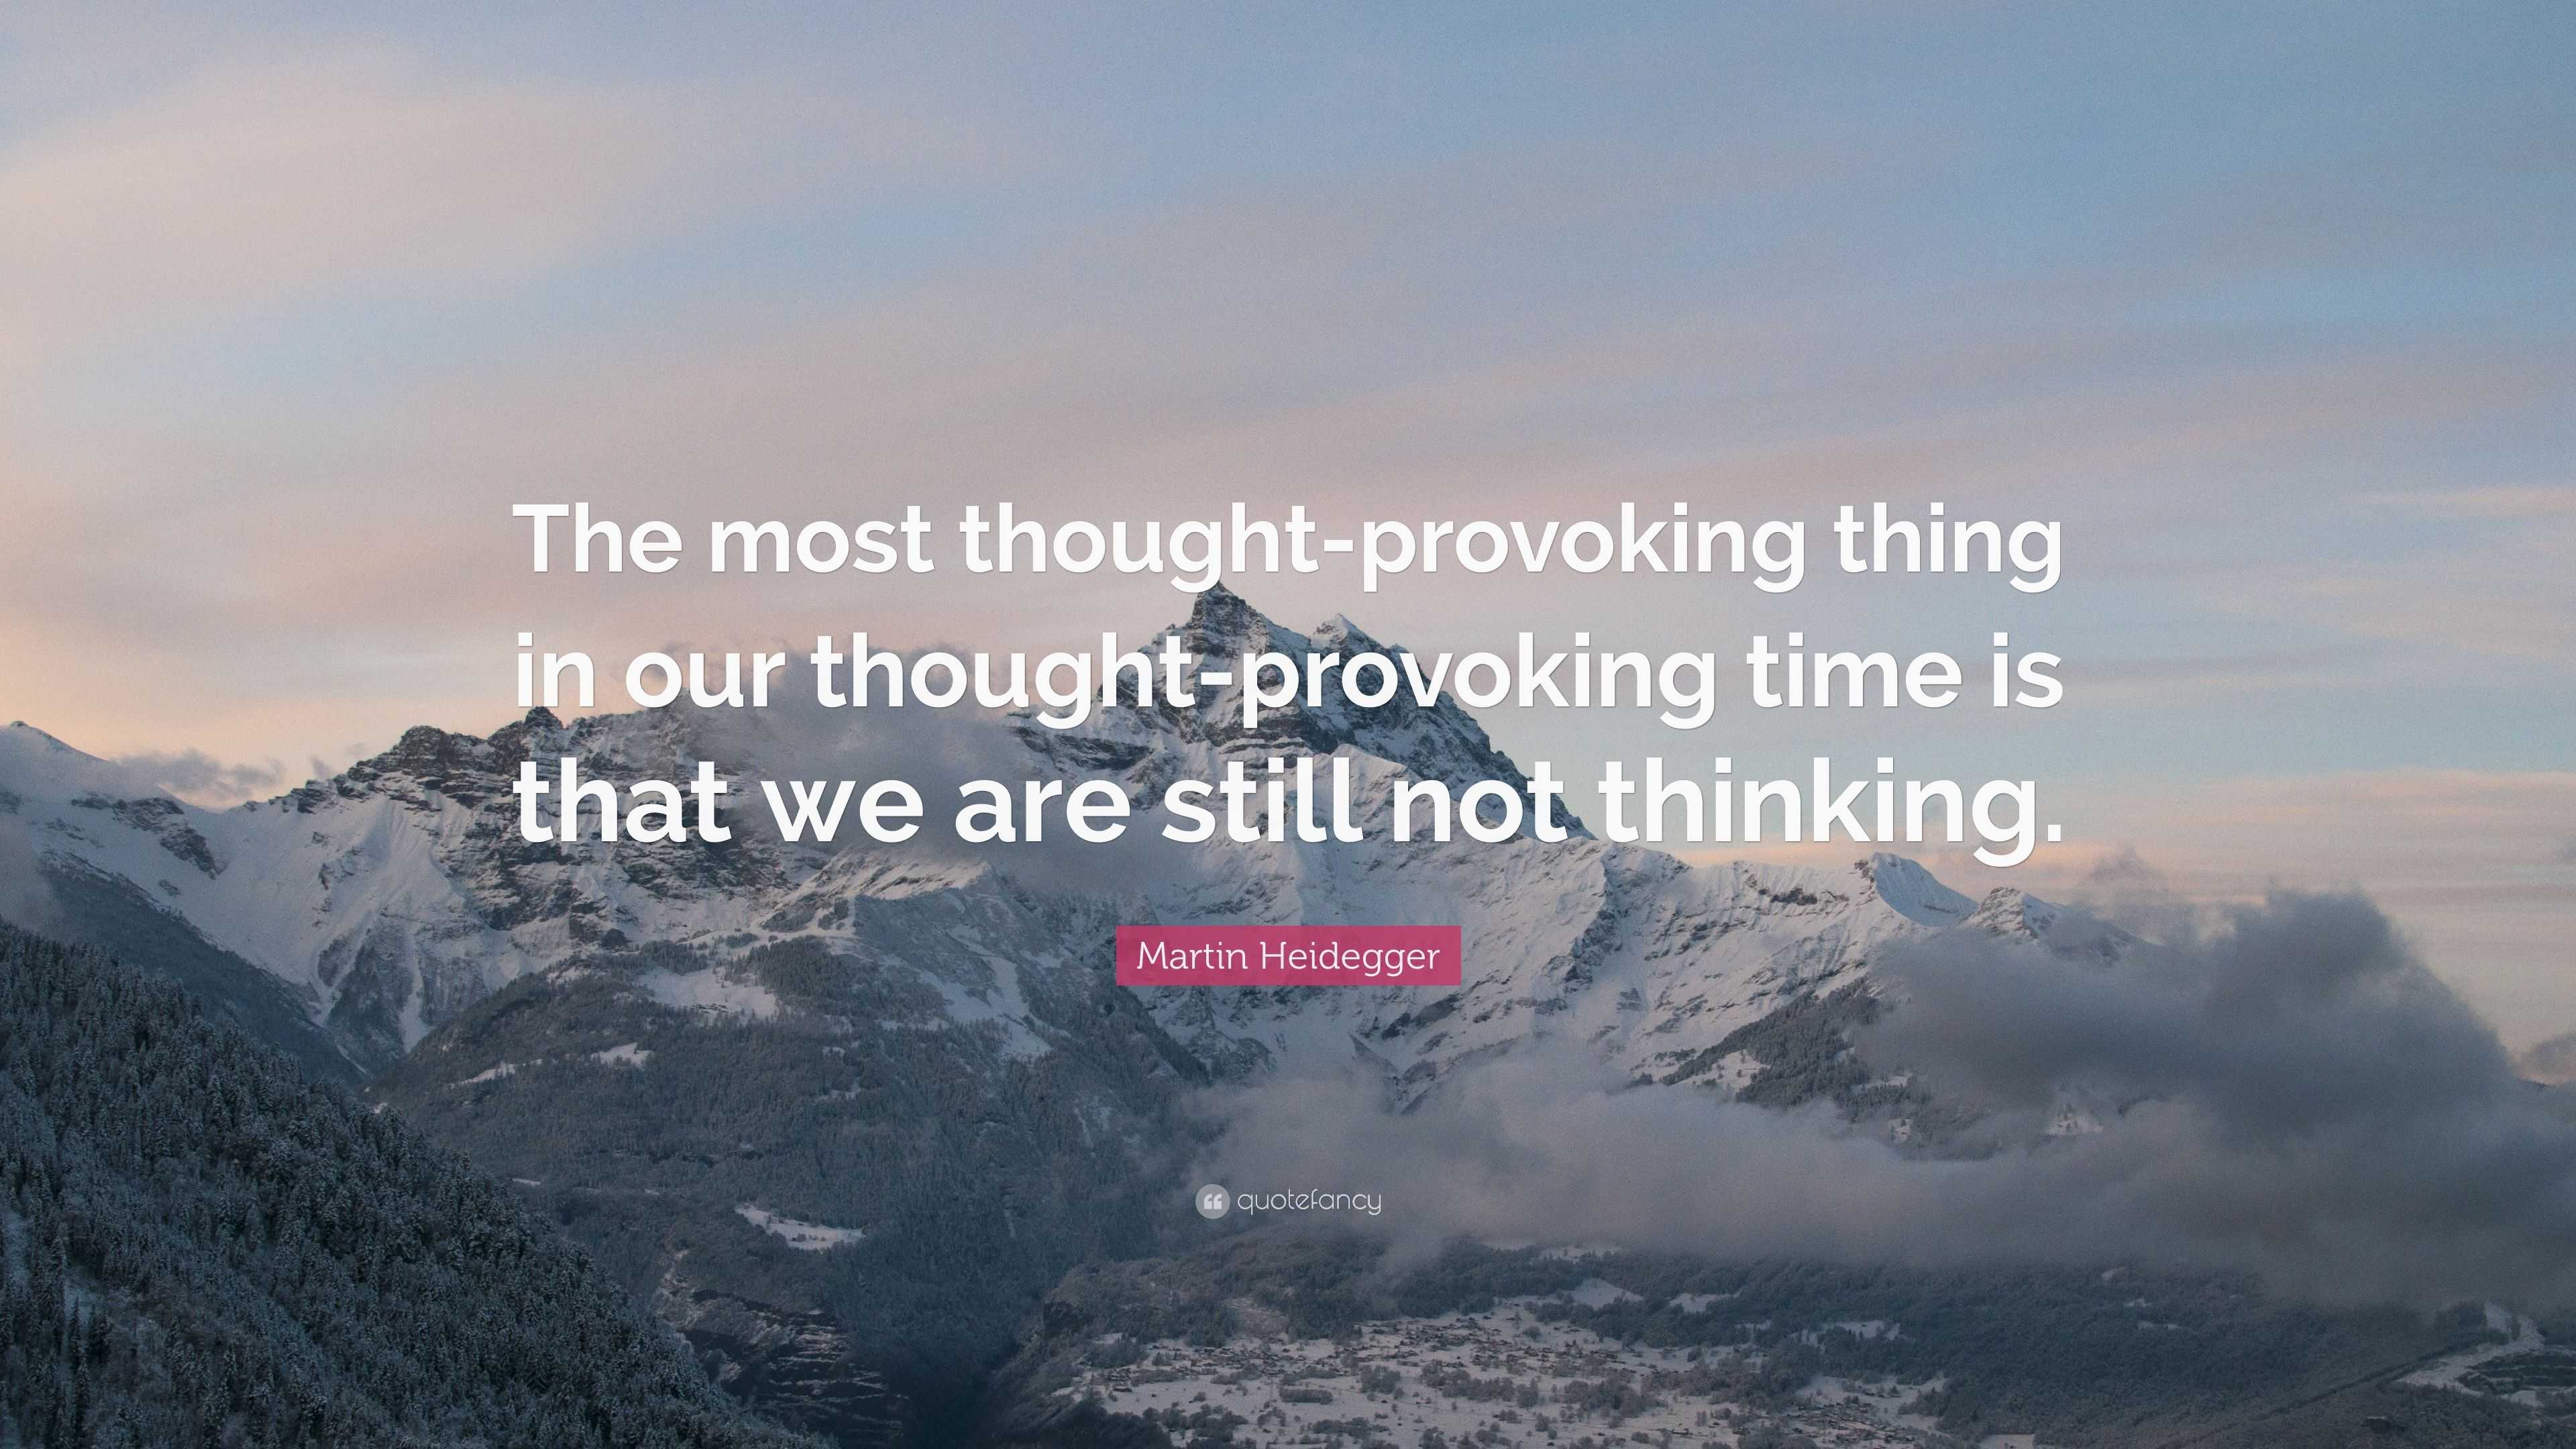 Martin Heidegger Quote: "The most thought-provoking thing ...